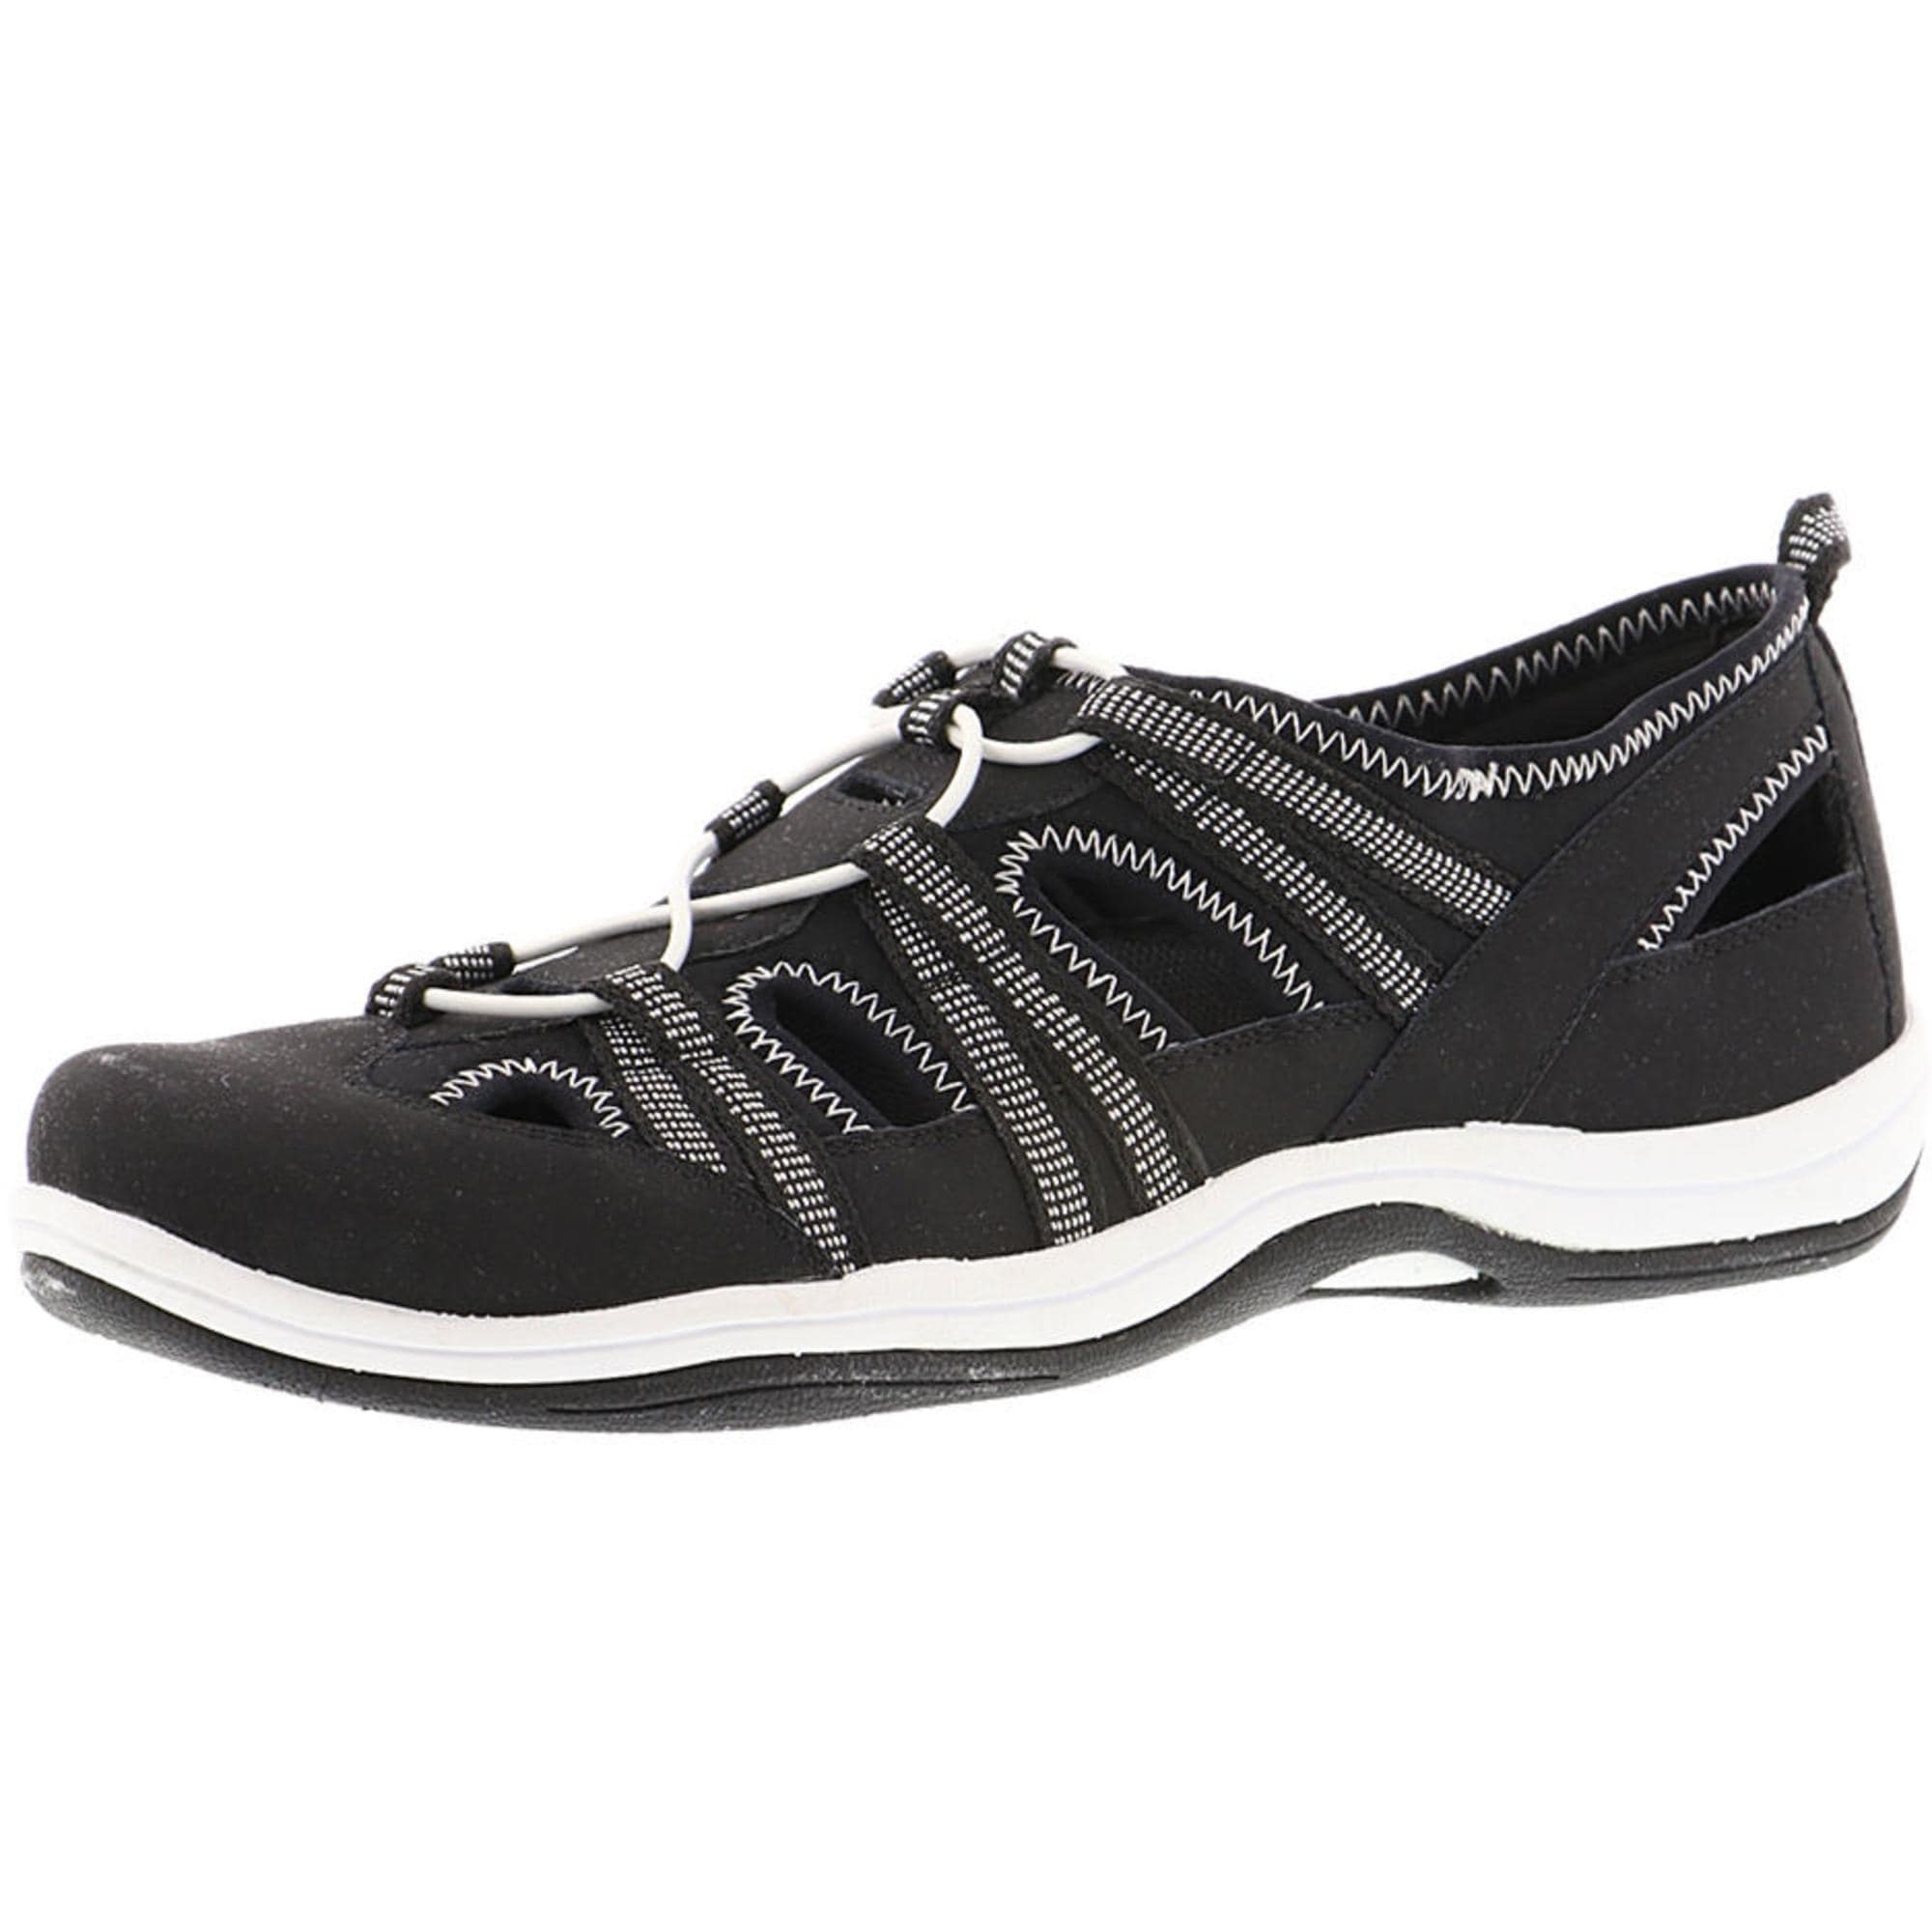 campus women's running shoes